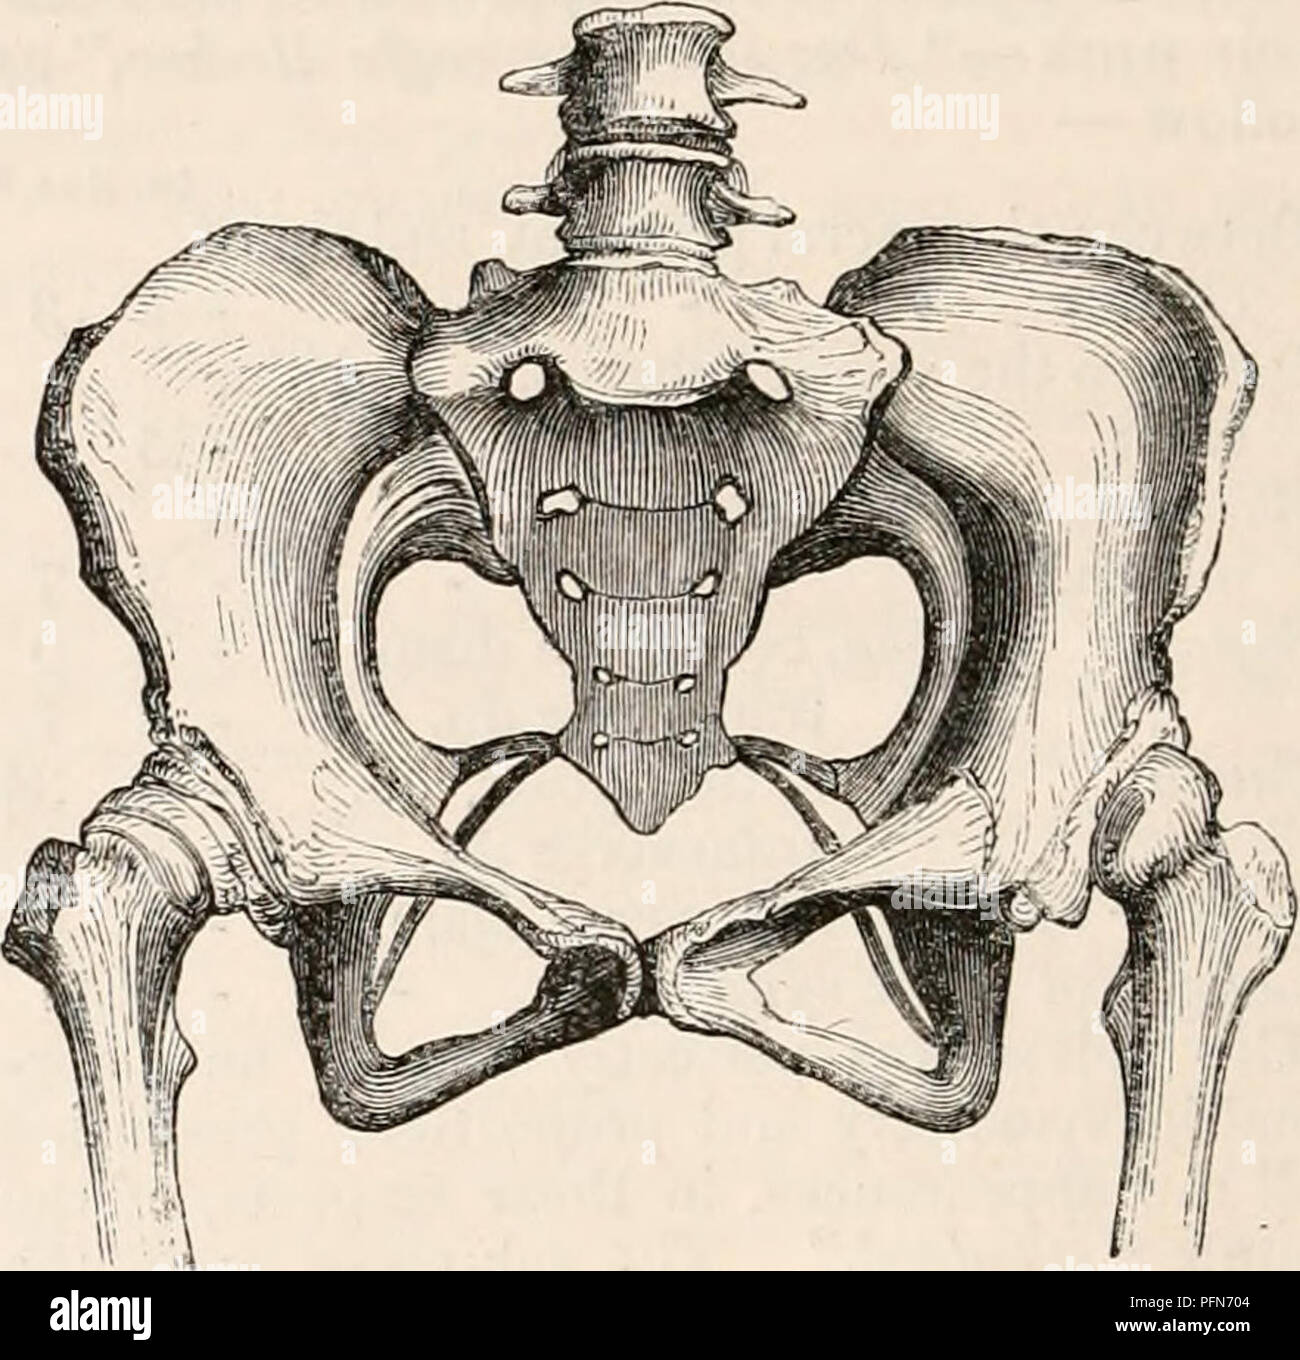 . The cyclopædia of anatomy and physiology. Anatomy; Physiology; Zoology. 180 PELVIS. was only 4 feet high, and had never walked nor menstruated, the sacrum and innominate bones were connected by cartilage only, but the ischio-pubic rami were united. It pre- sented, in size as well as form, the charac- teristics of that of a child of six or seven years old. The conjugate diameter was larger than the transverse, the ilio-pectineal line little curved, and the cavity funnel-shaped, the sub-pubic angle being only 3(H°. The bones were not rickety. The organs of generation, both internal and externa Stock Photo